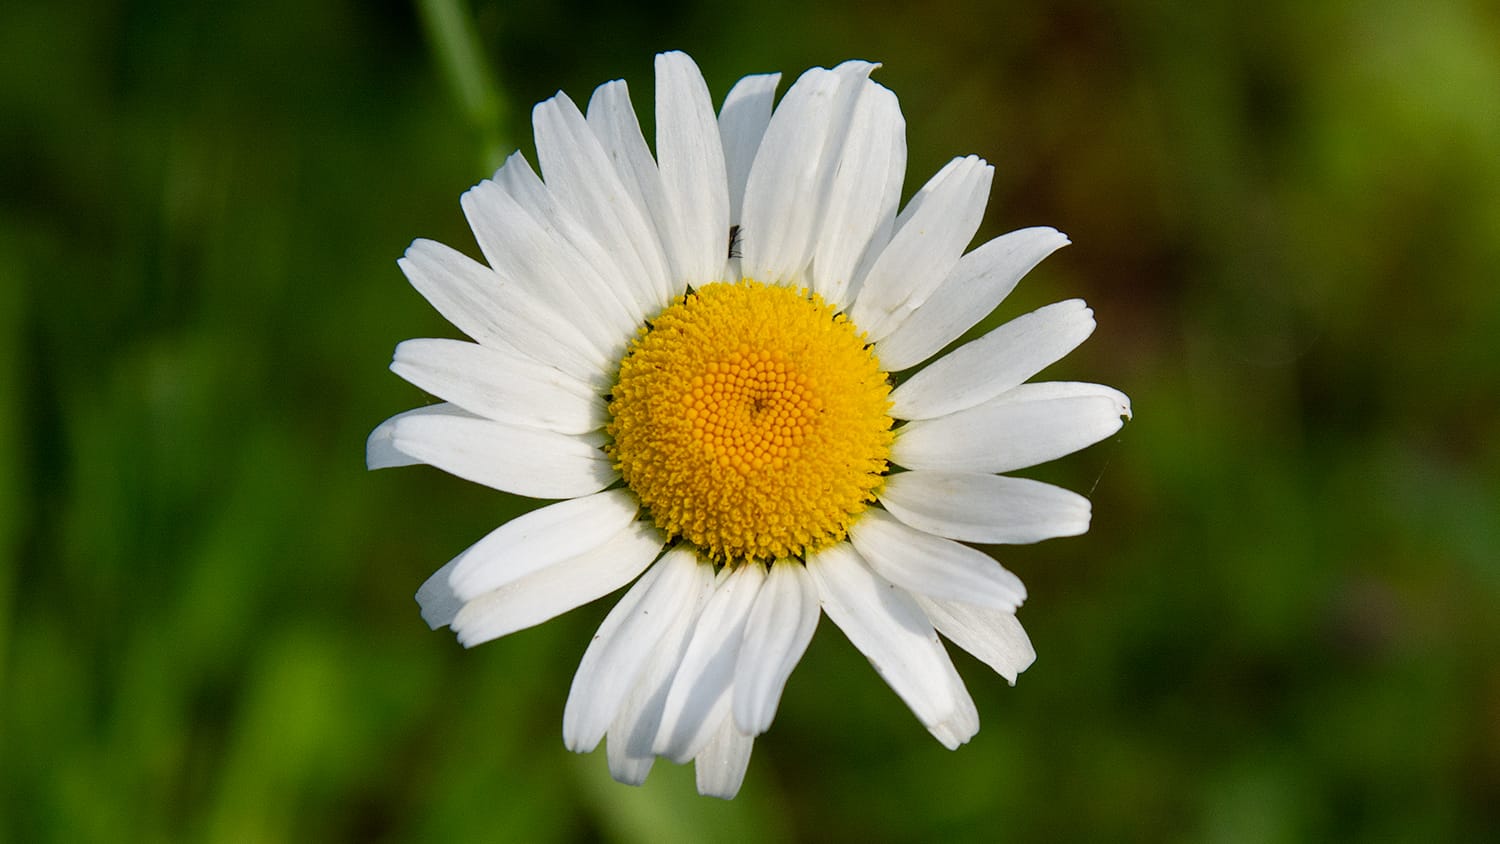 The Shasta Daisy, a species of daisy developed by Luther Burbank, is prepared as a flower essence by FES